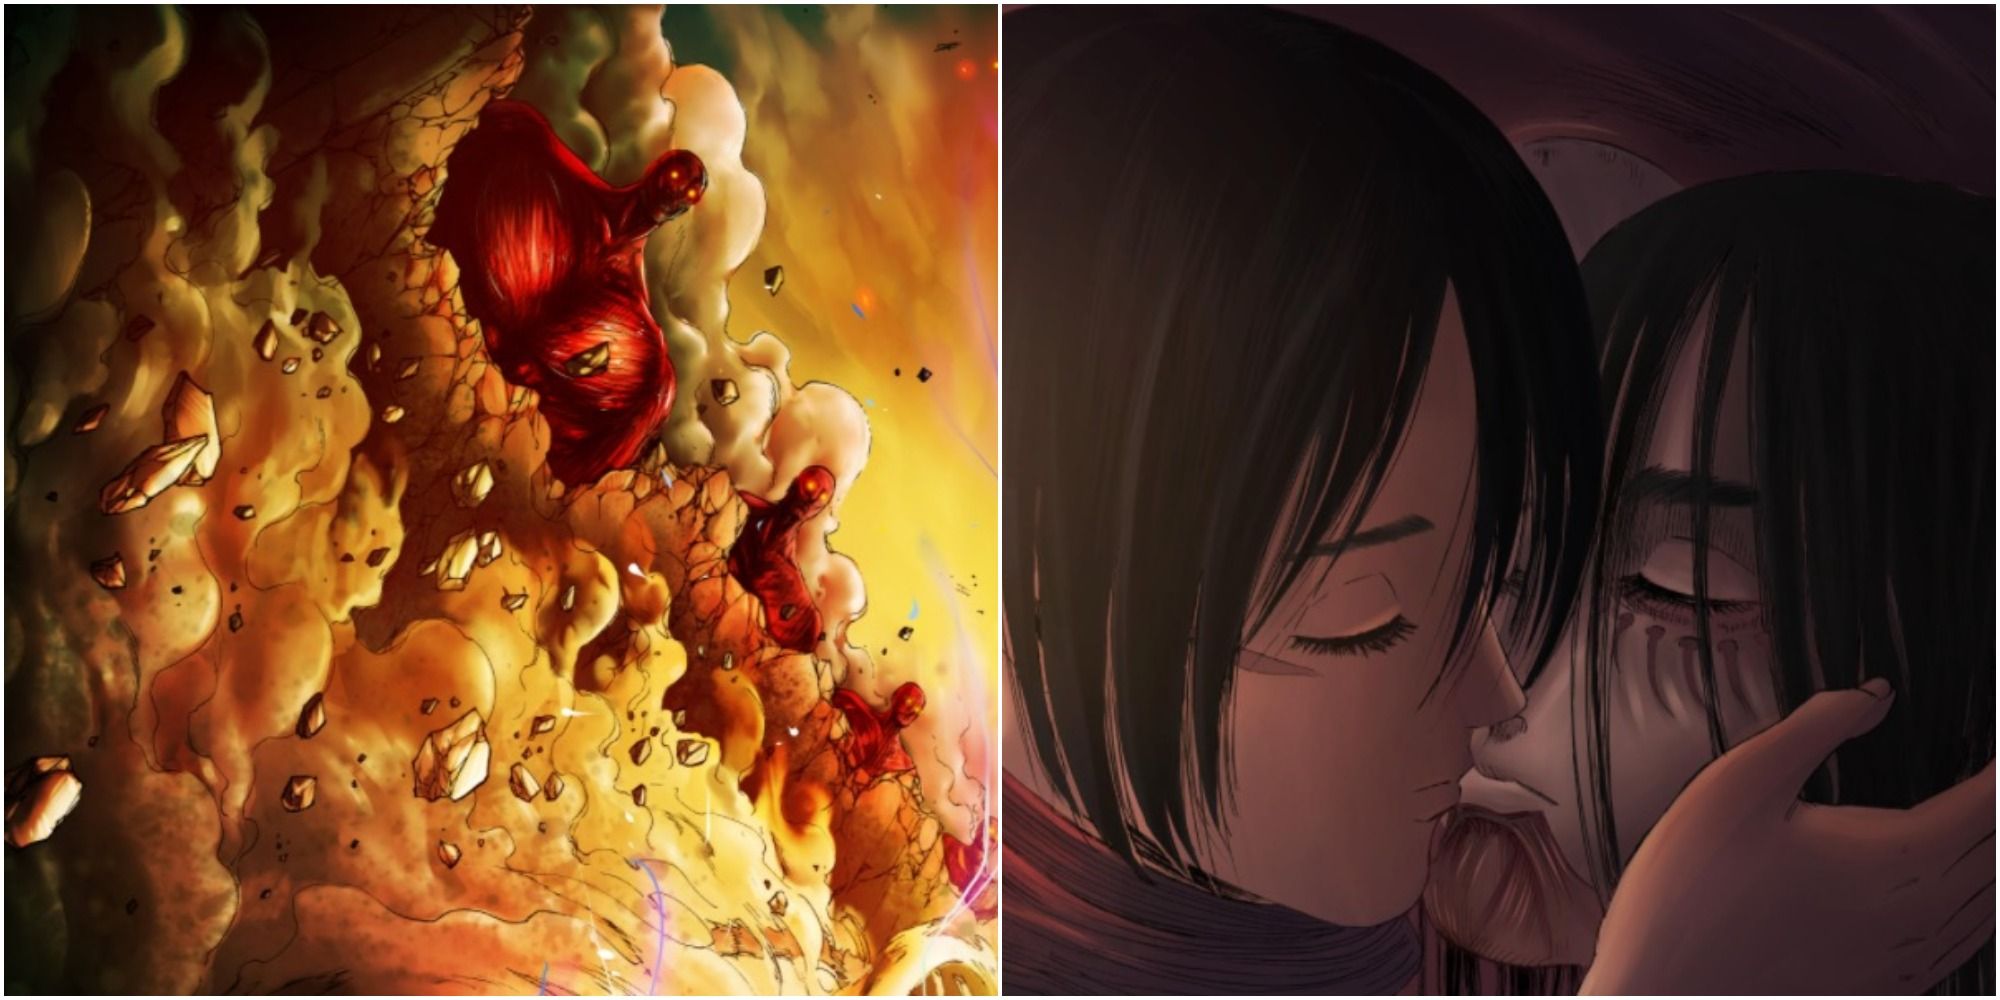 Attack On Titan 10 Most Unexpected Things About The Manga S Ending